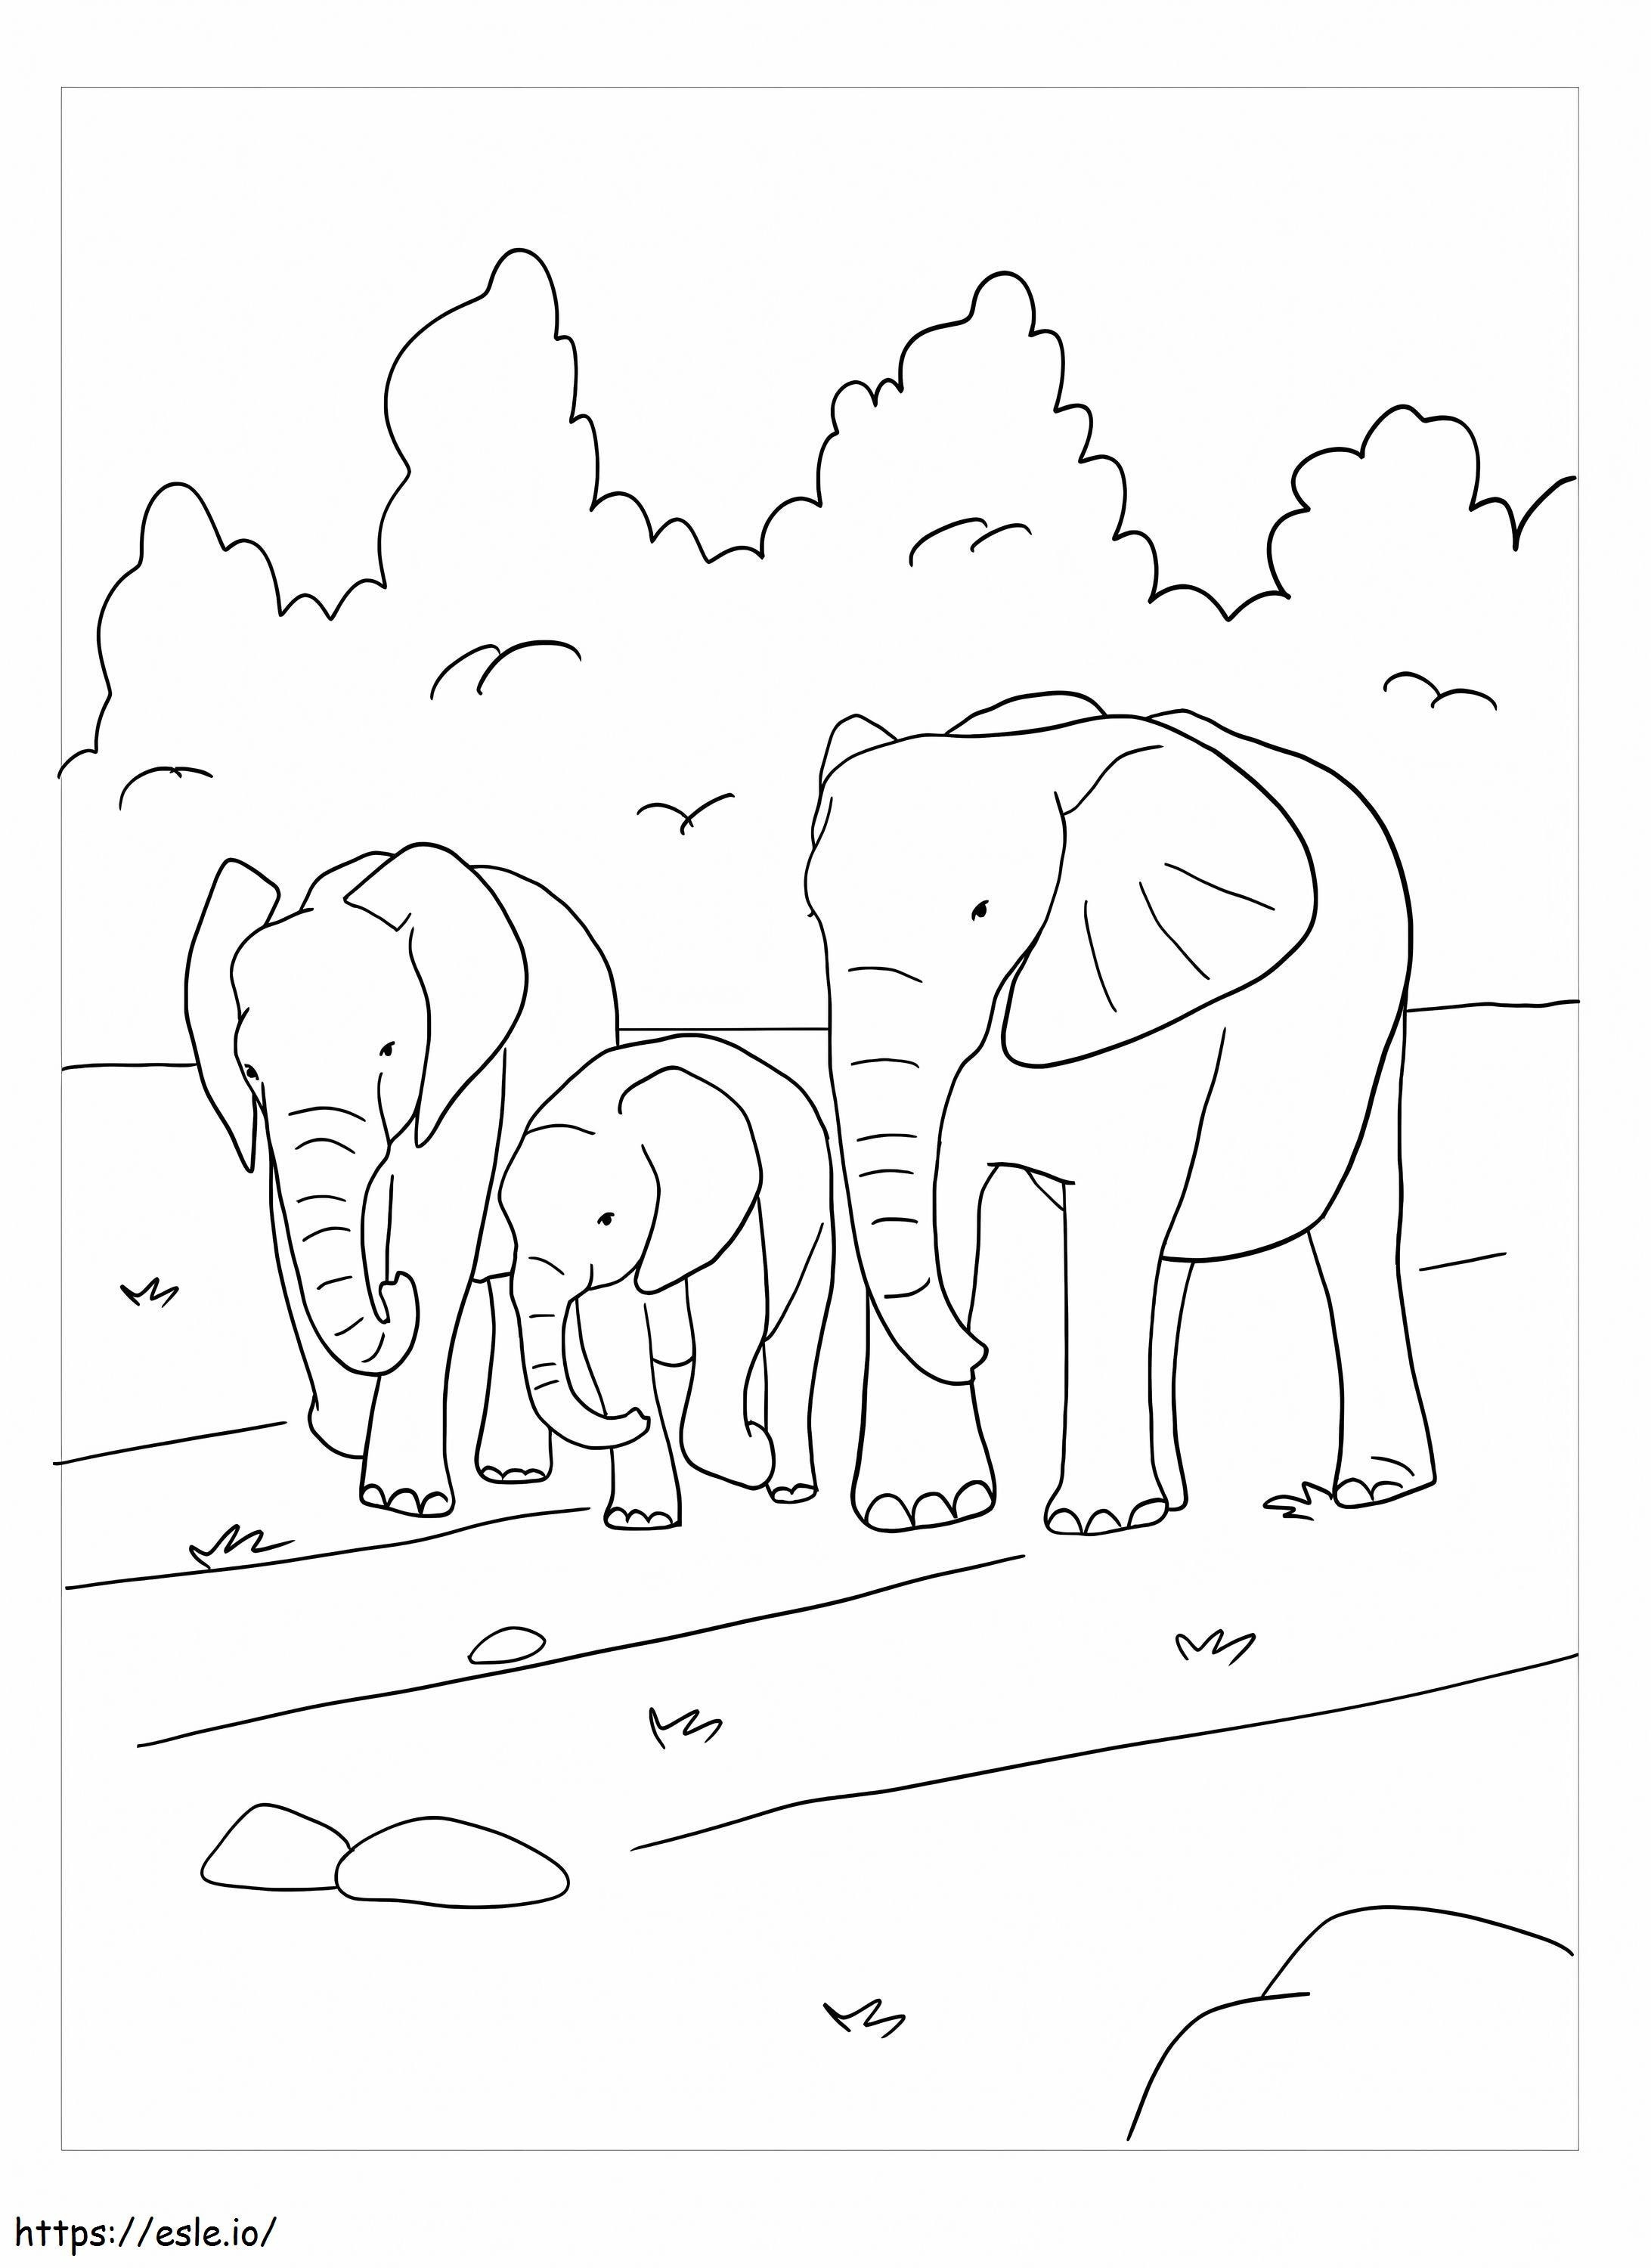 Elephant Family coloring page